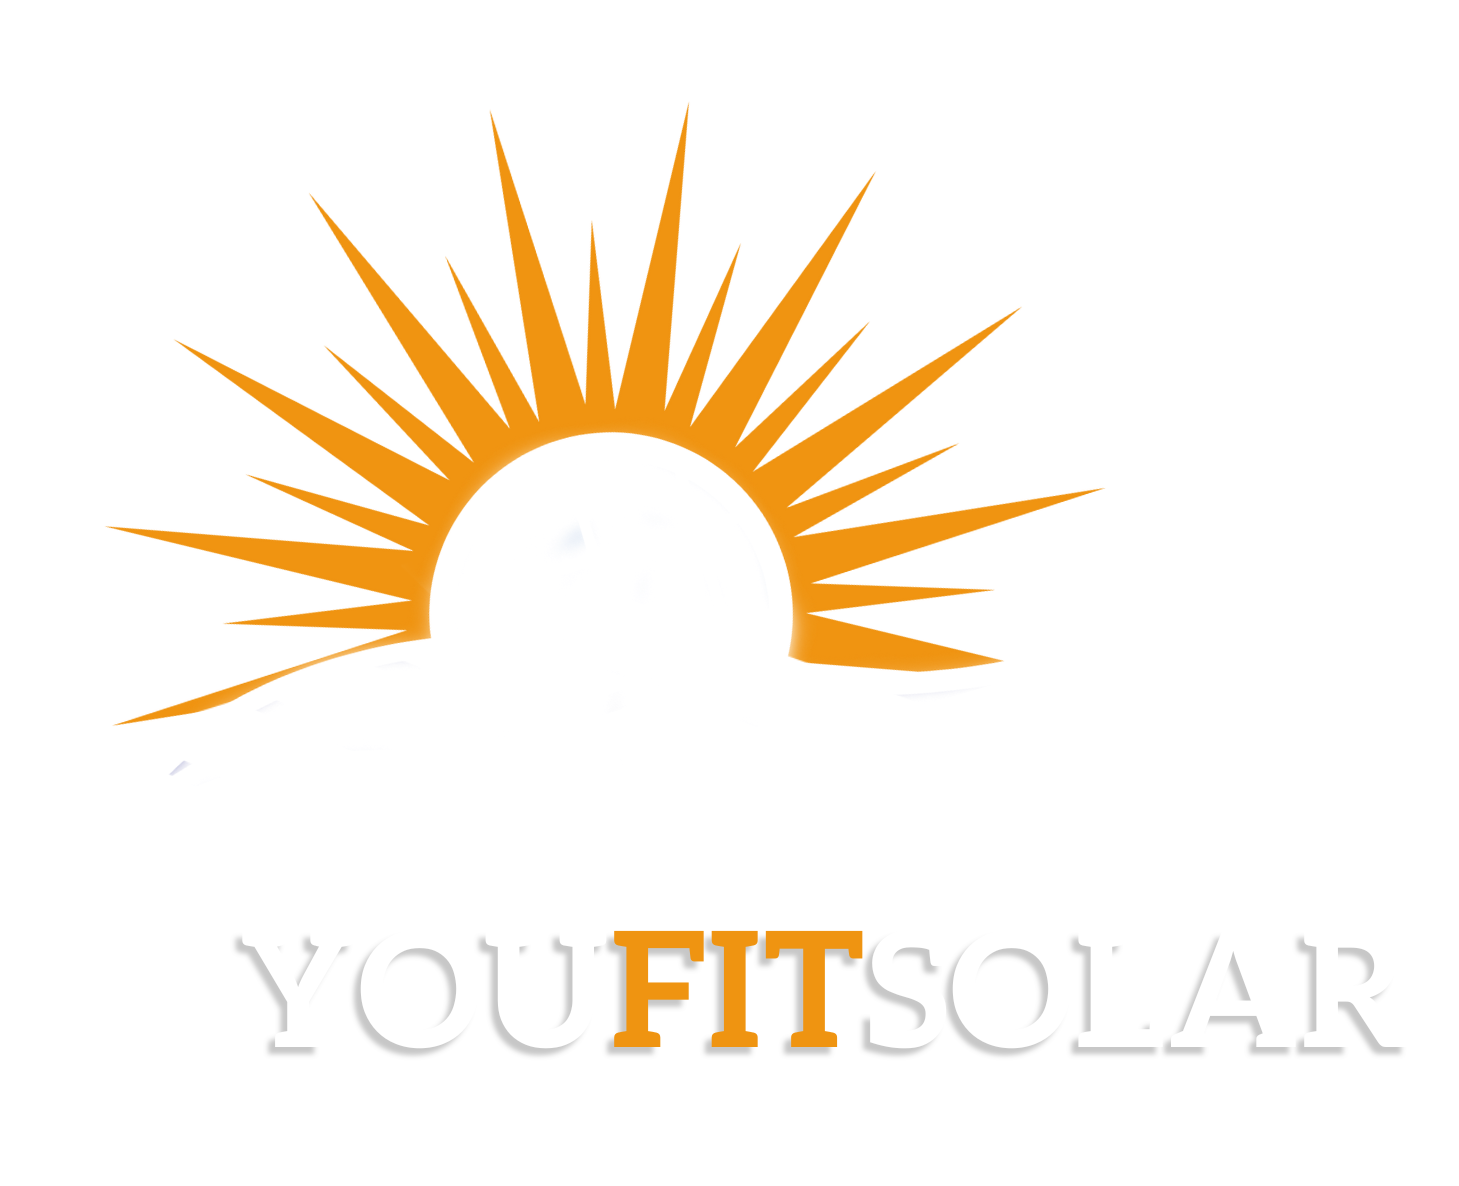 You Fit Solar